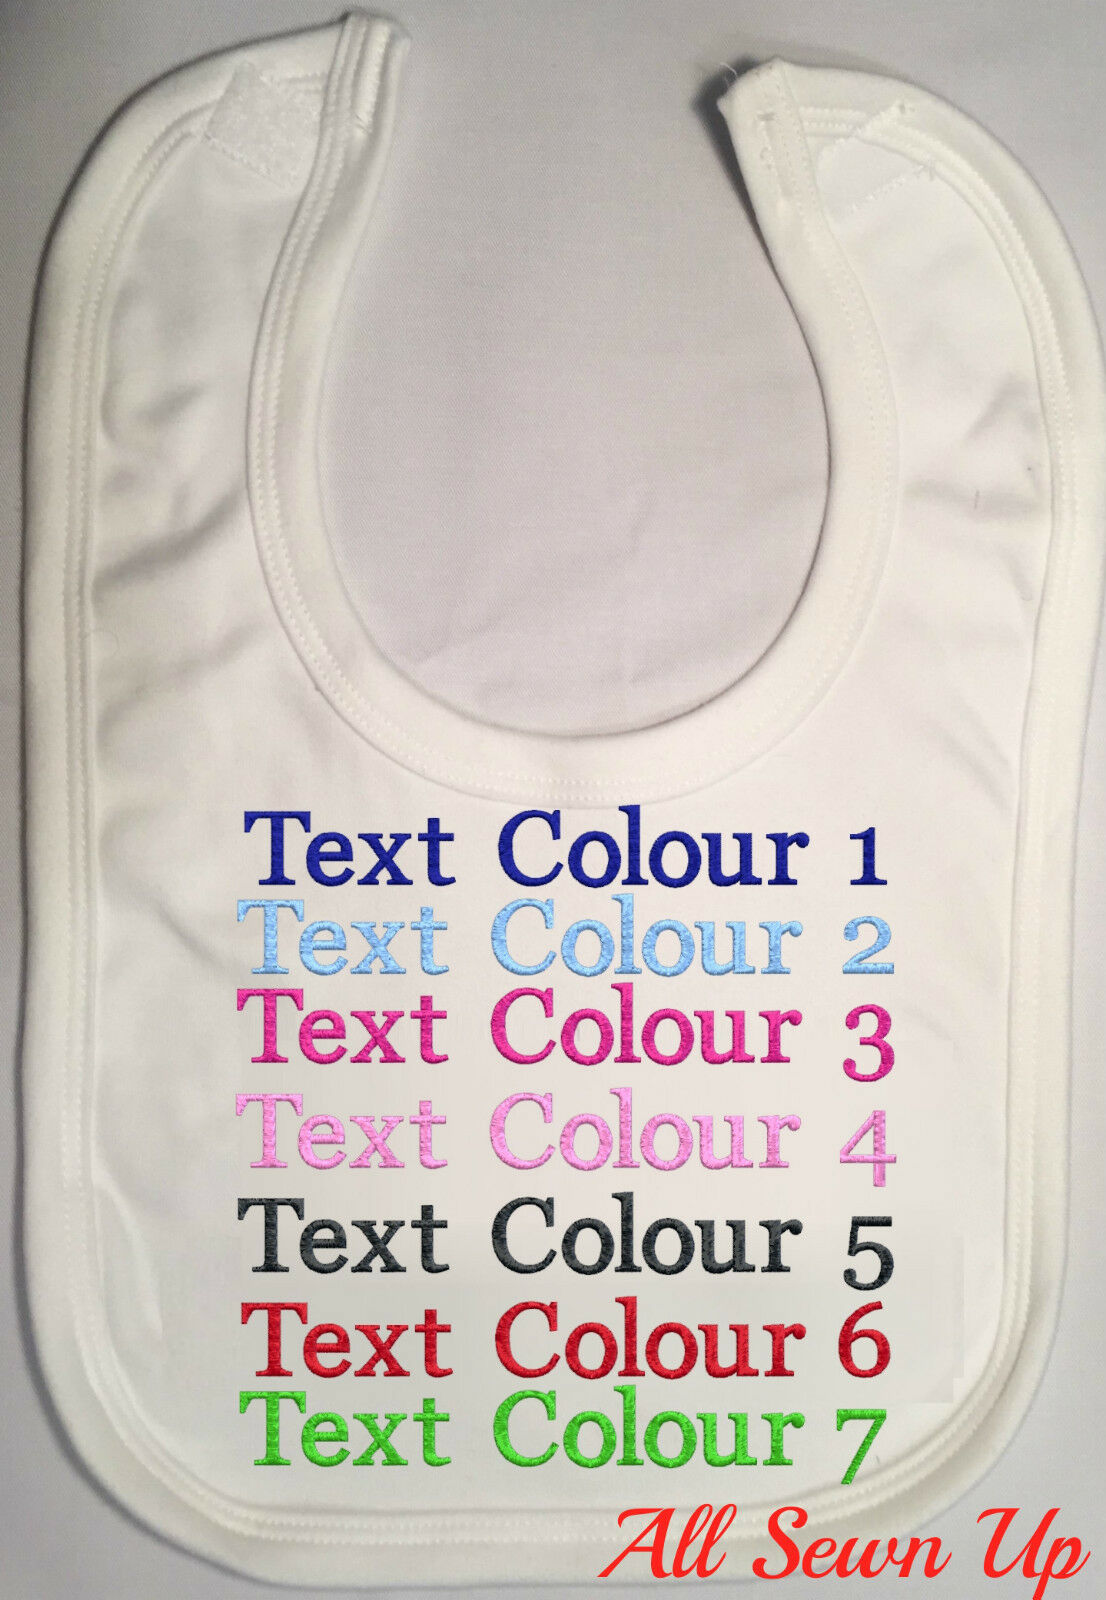 Personalised / Embroidered Allergy Bib: "I have allergies"